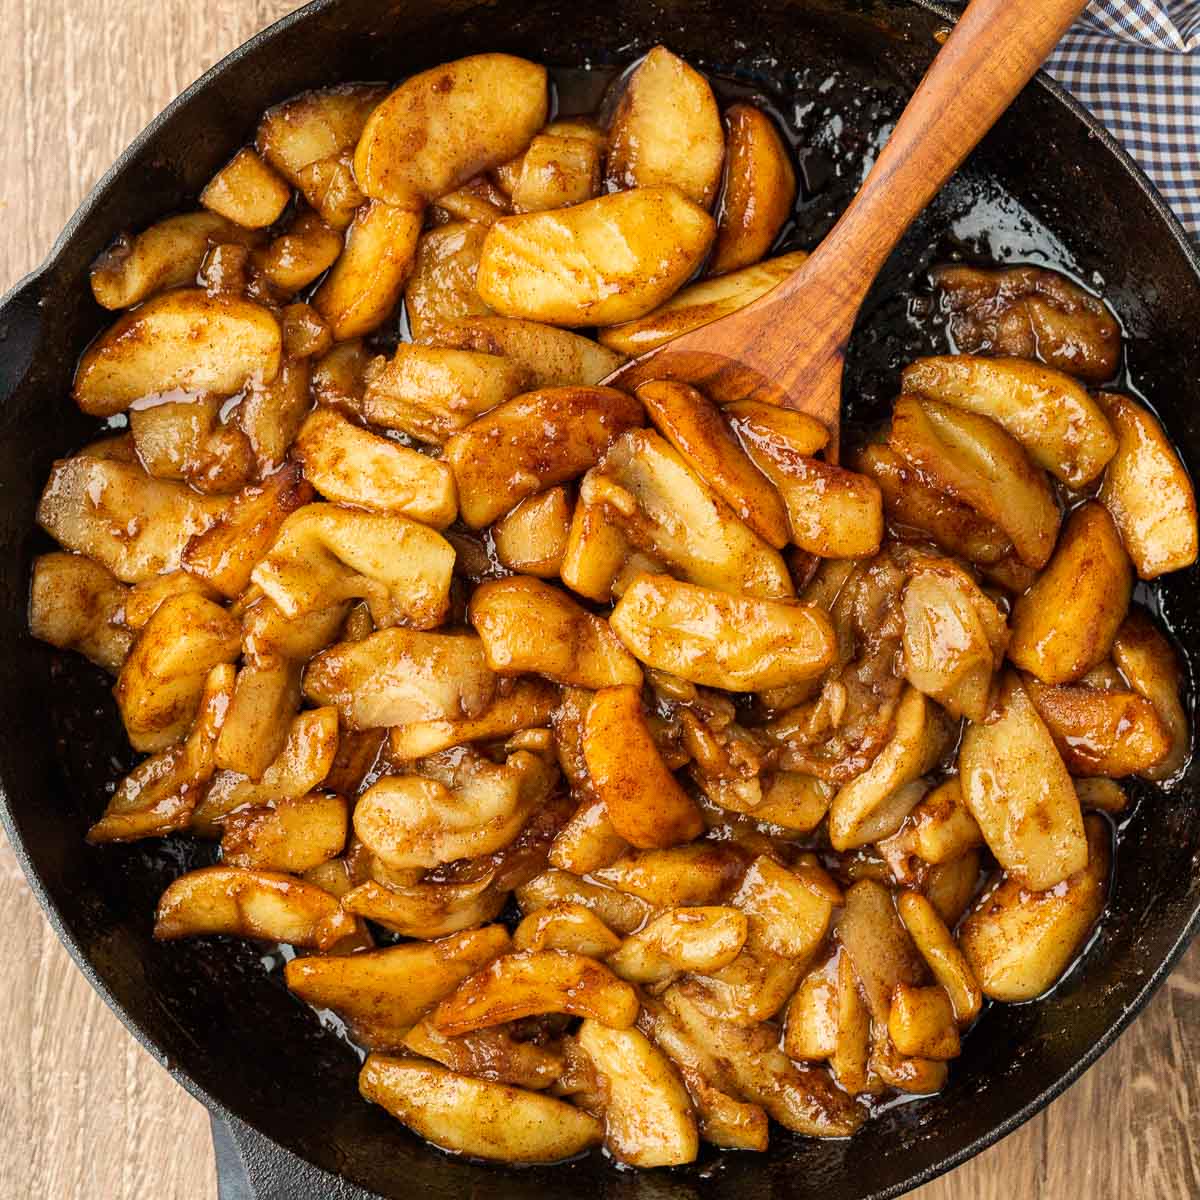 Fried Apples in a dish with a wooden spoon